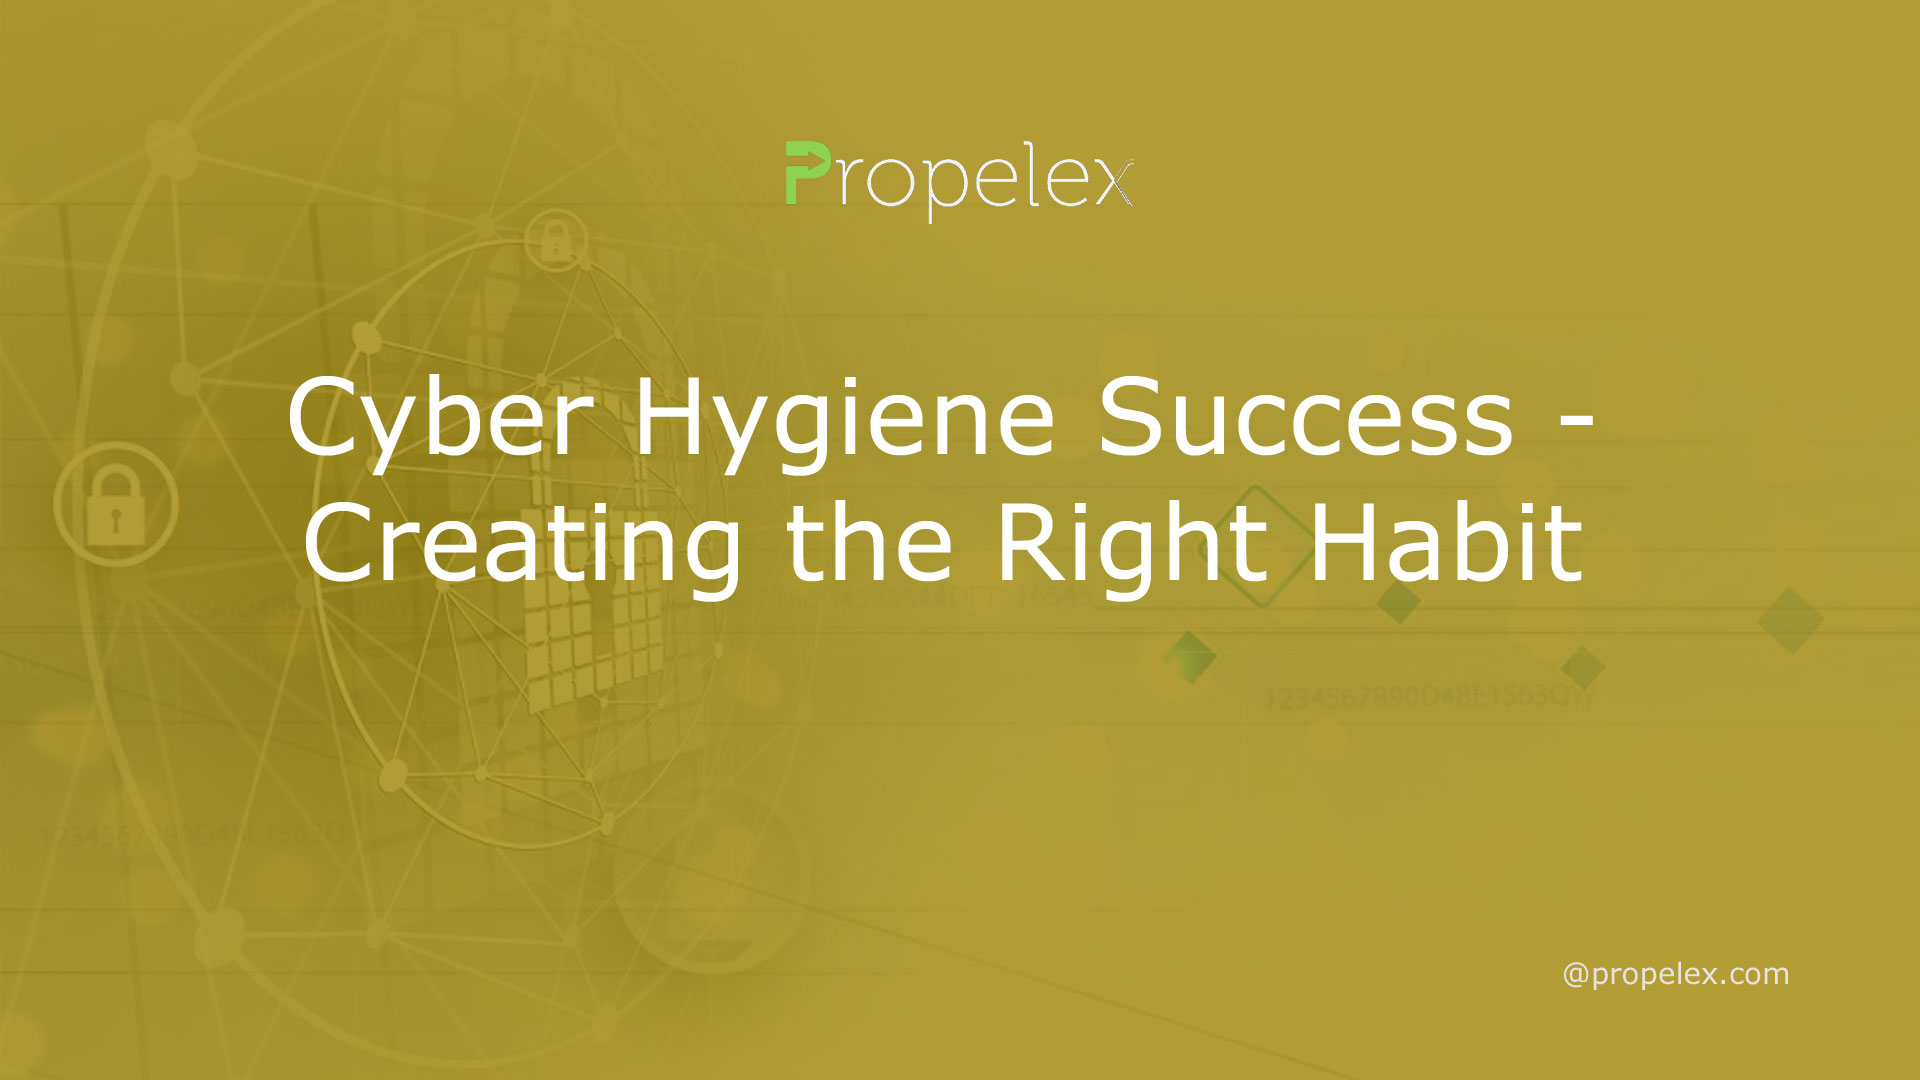 Cyber Hygiene Success - Creating the Right Habit